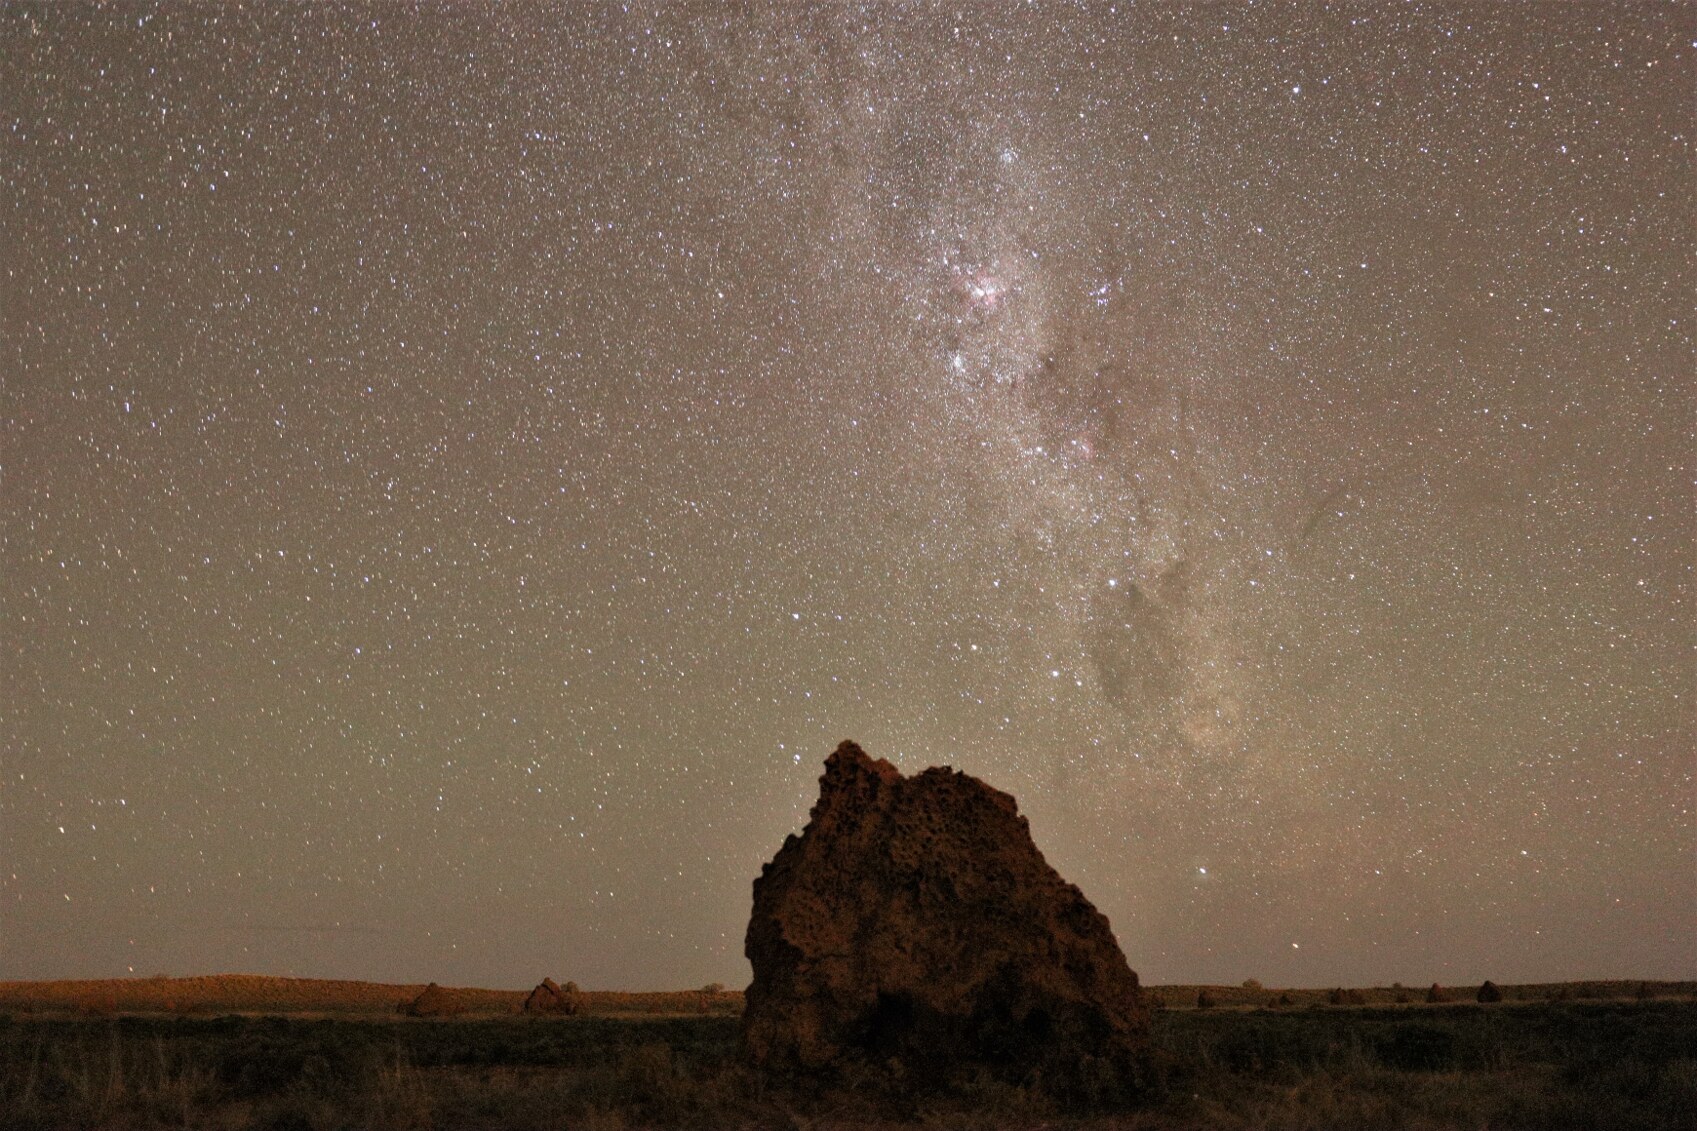 The stunning and crowded night sky of the Pilbara